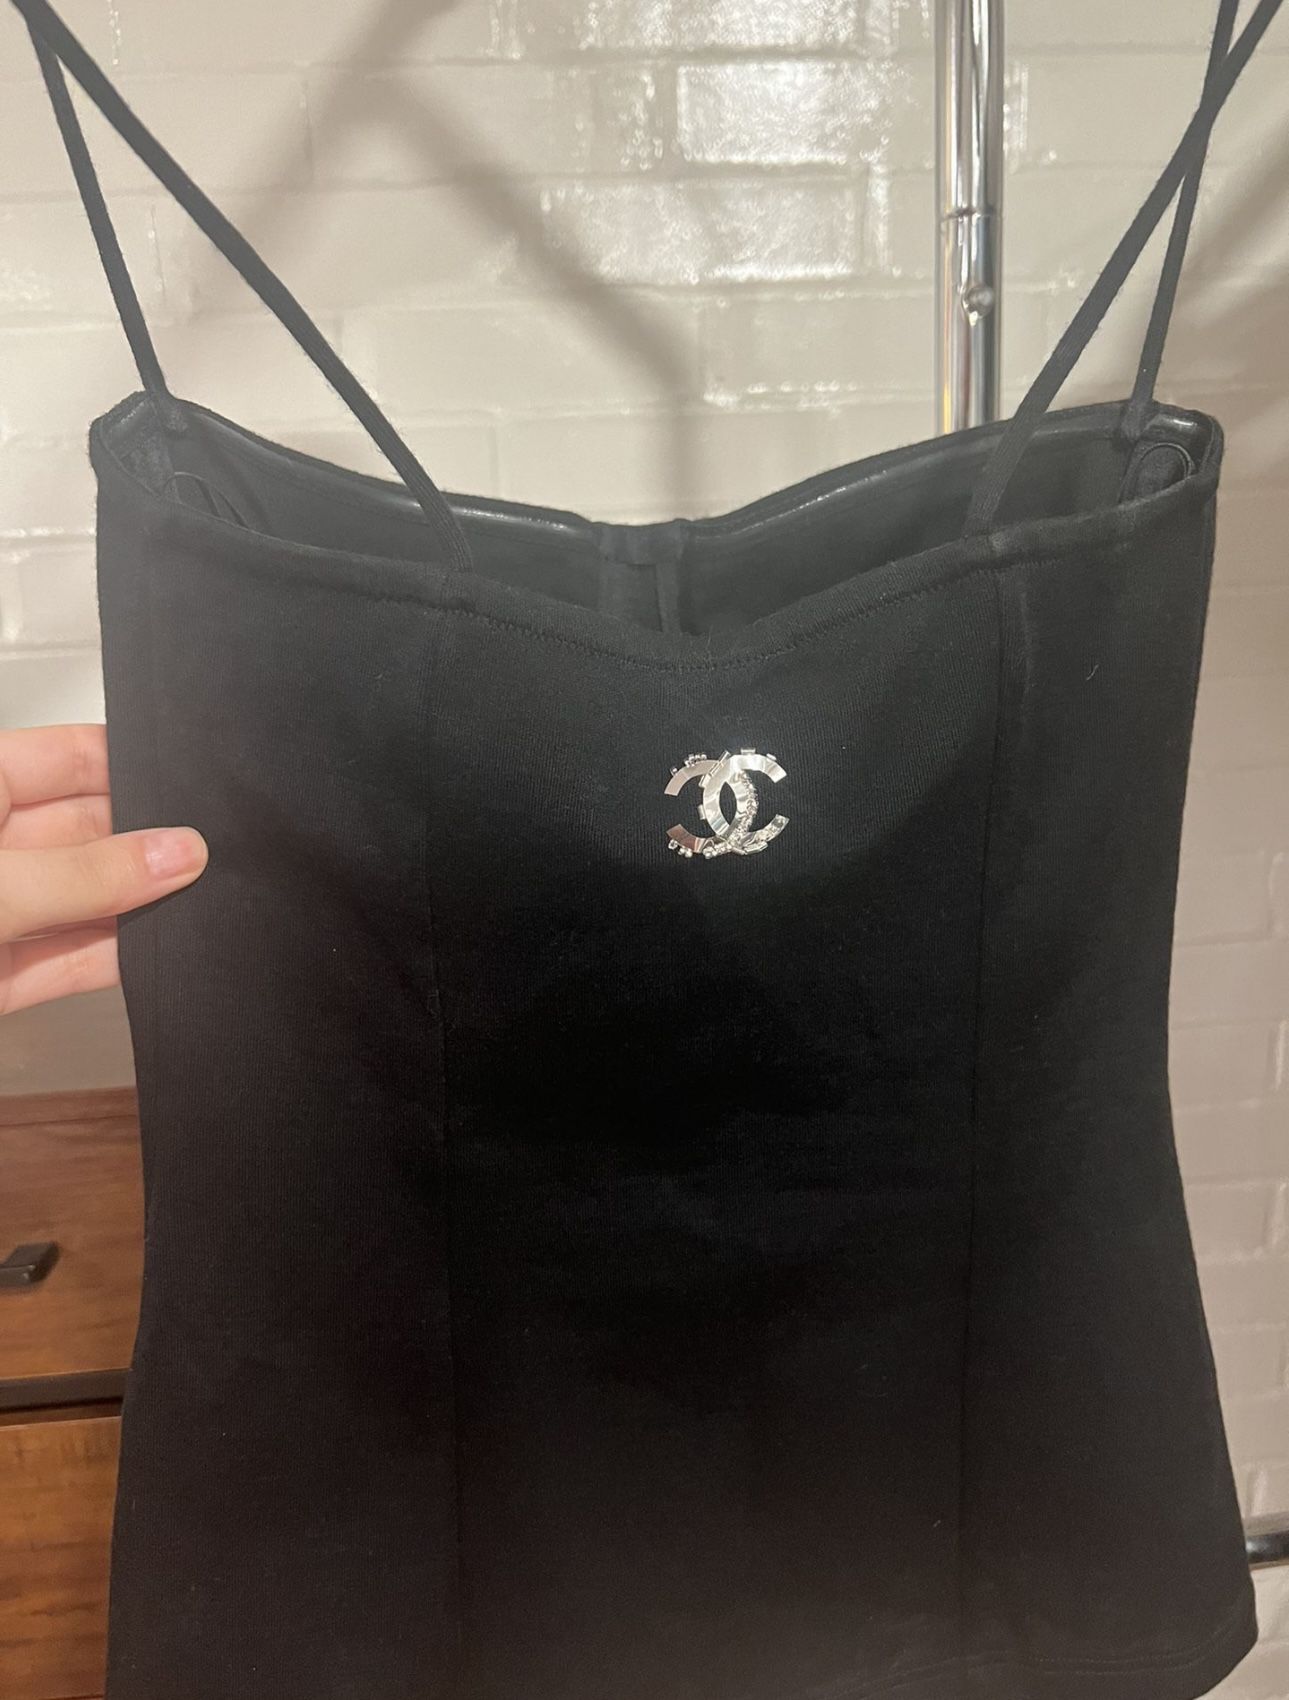 New Chanel Top Original With Tag From Chanel Boutique for Sale in West  Hollywood, CA - OfferUp